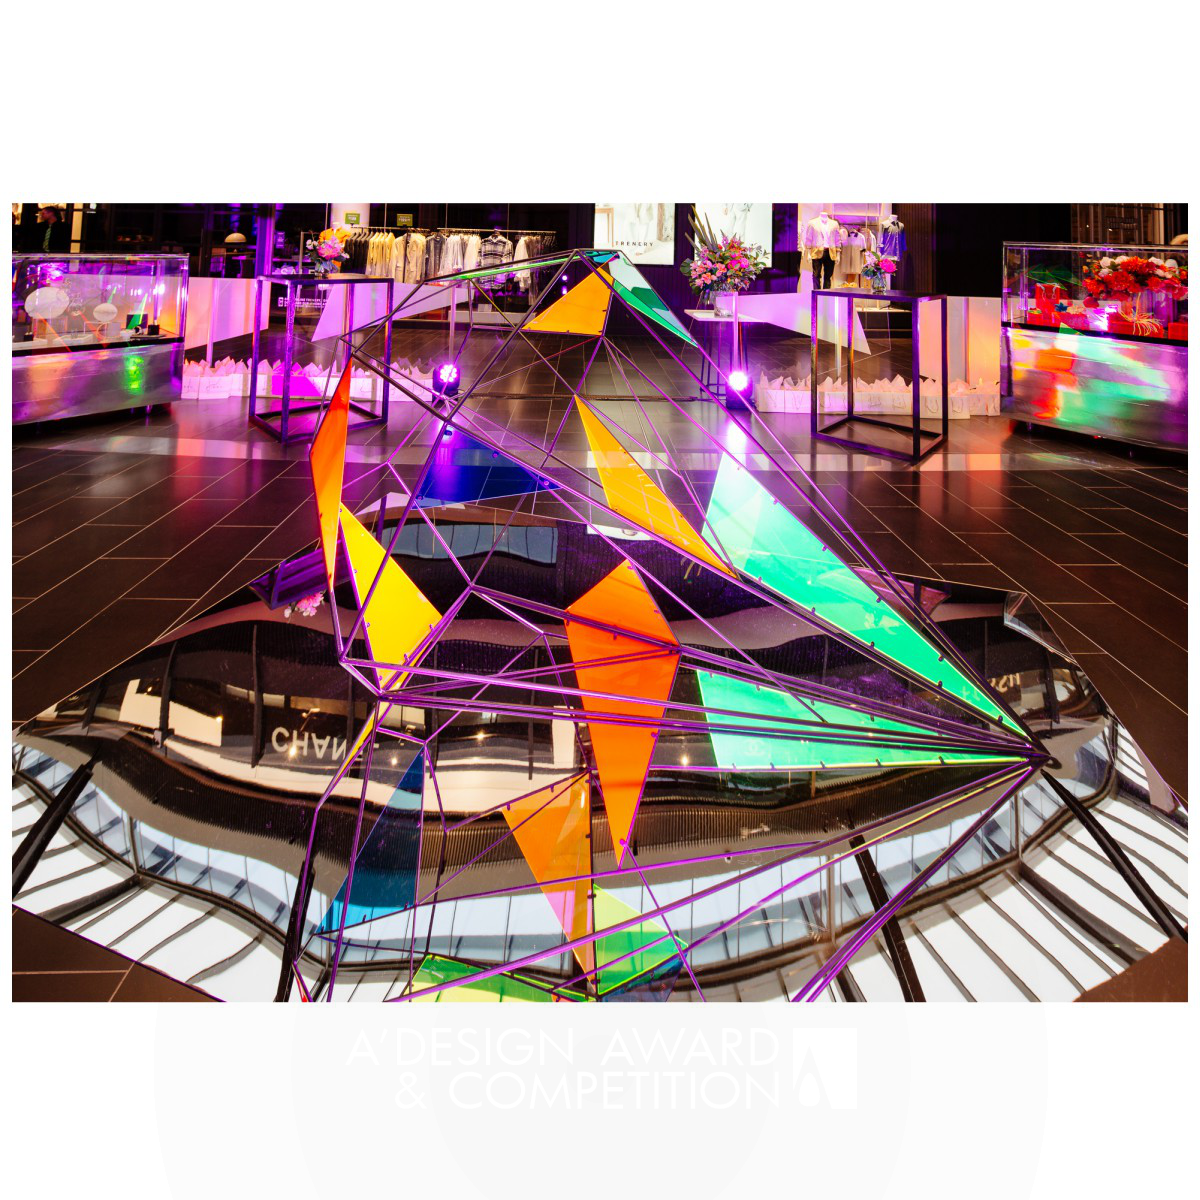  The Jewel Event Activation by Beck Storer